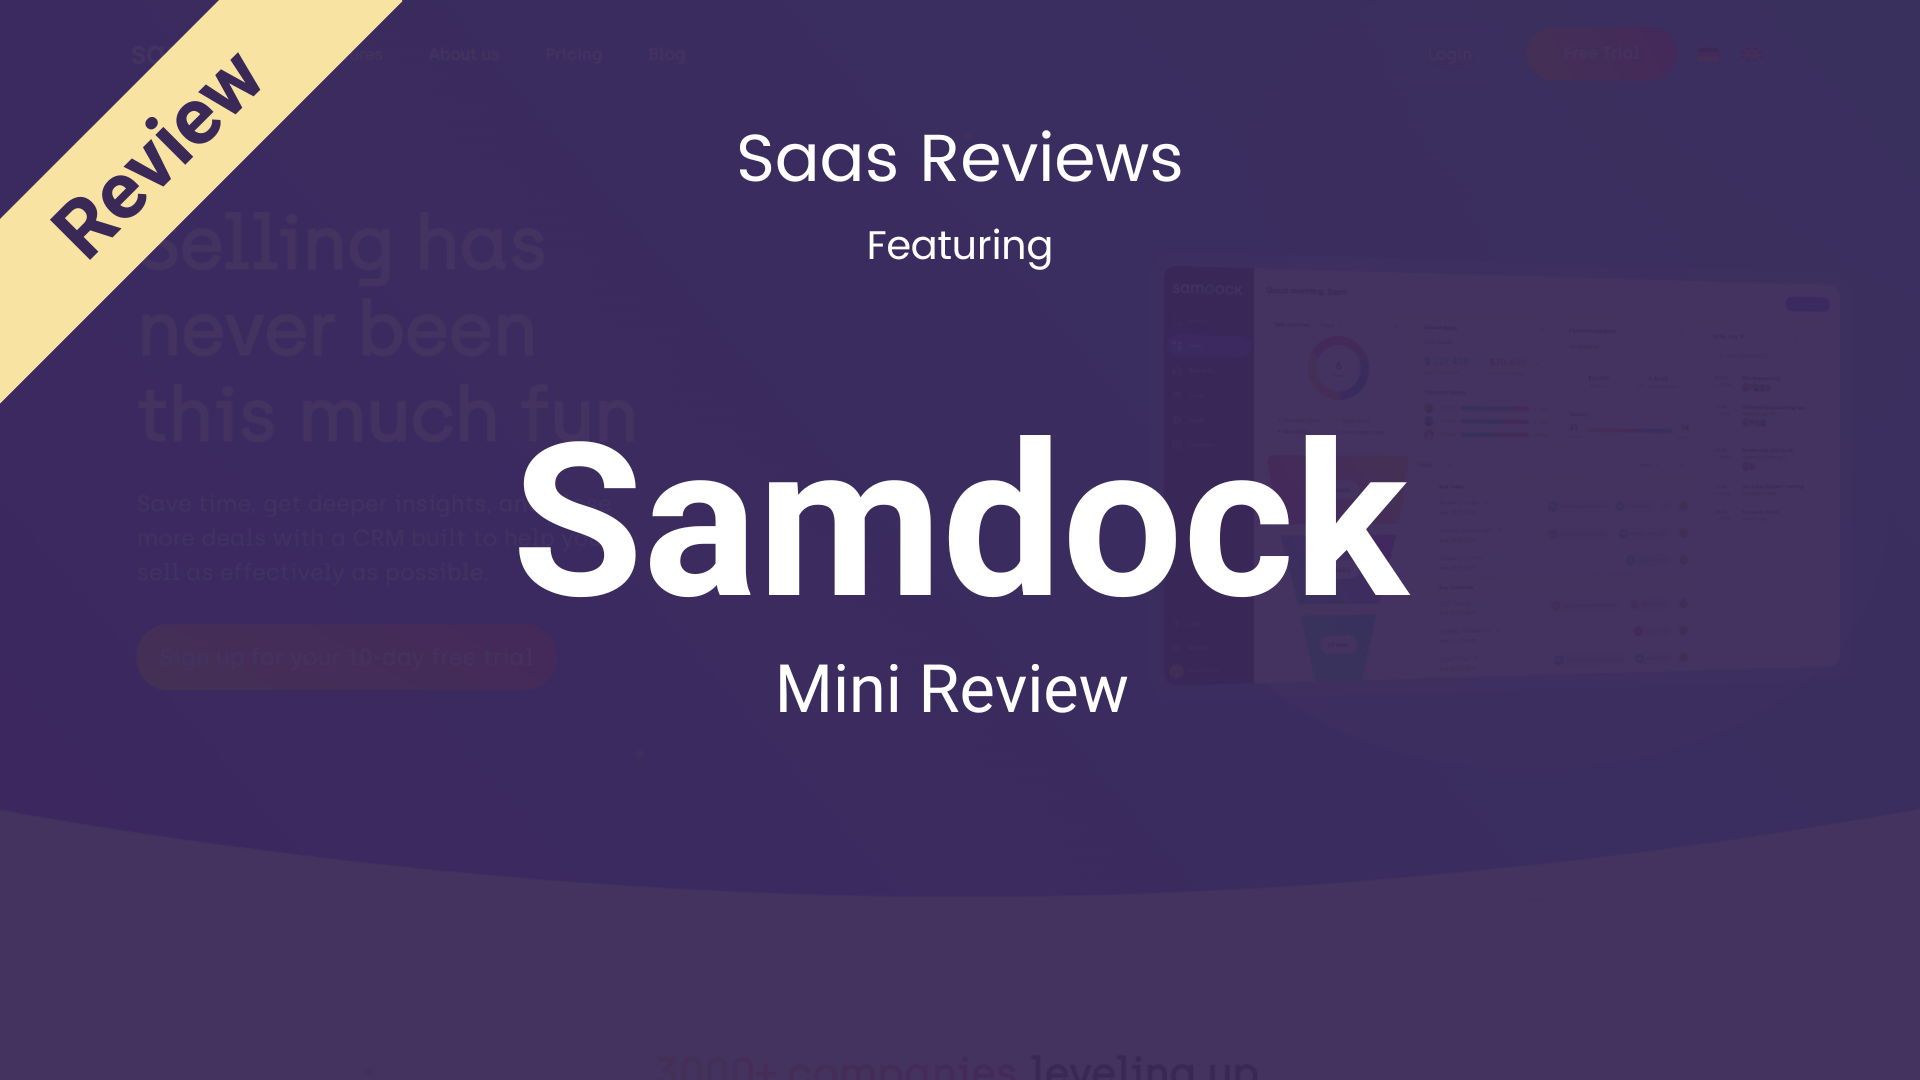 Samdock Review: A Well-Rounded CRM for Small Businesses